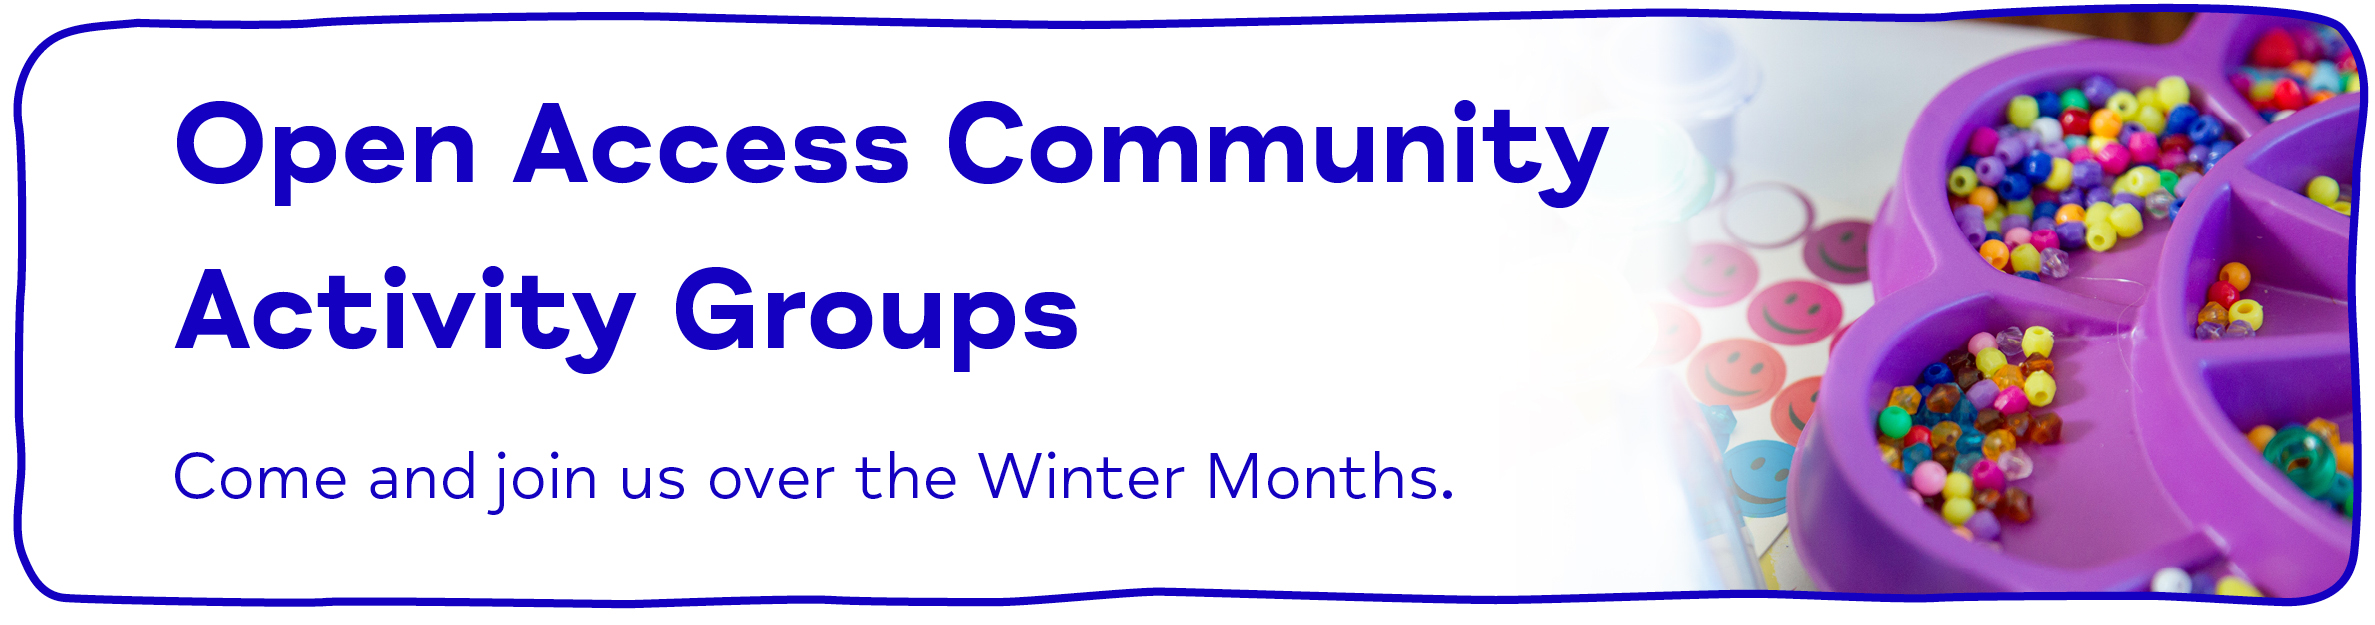 Open Access Community Activity Groups Come and join us over the Winter Months.